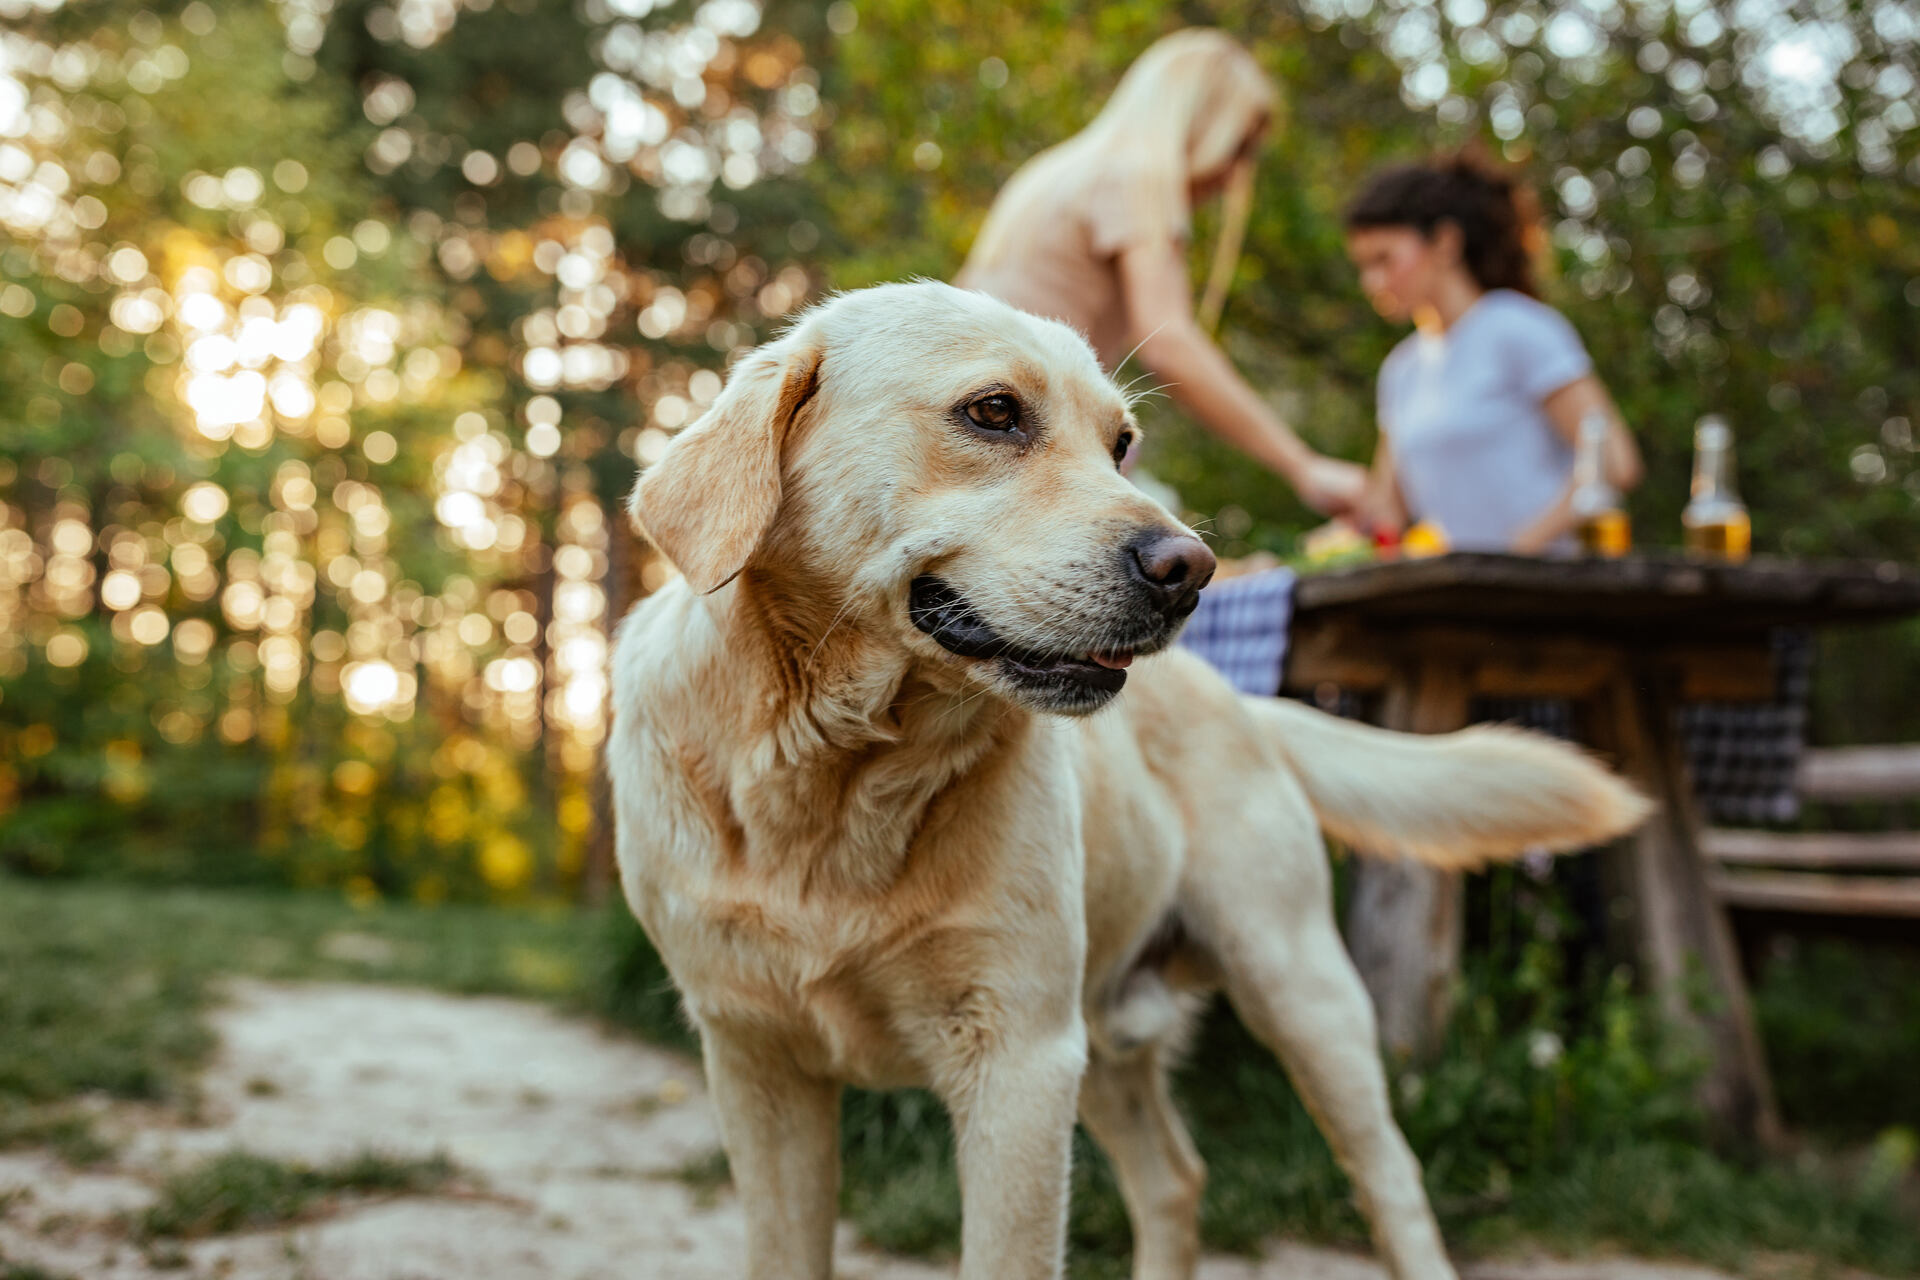 A dog sniffing around for food at a picnic